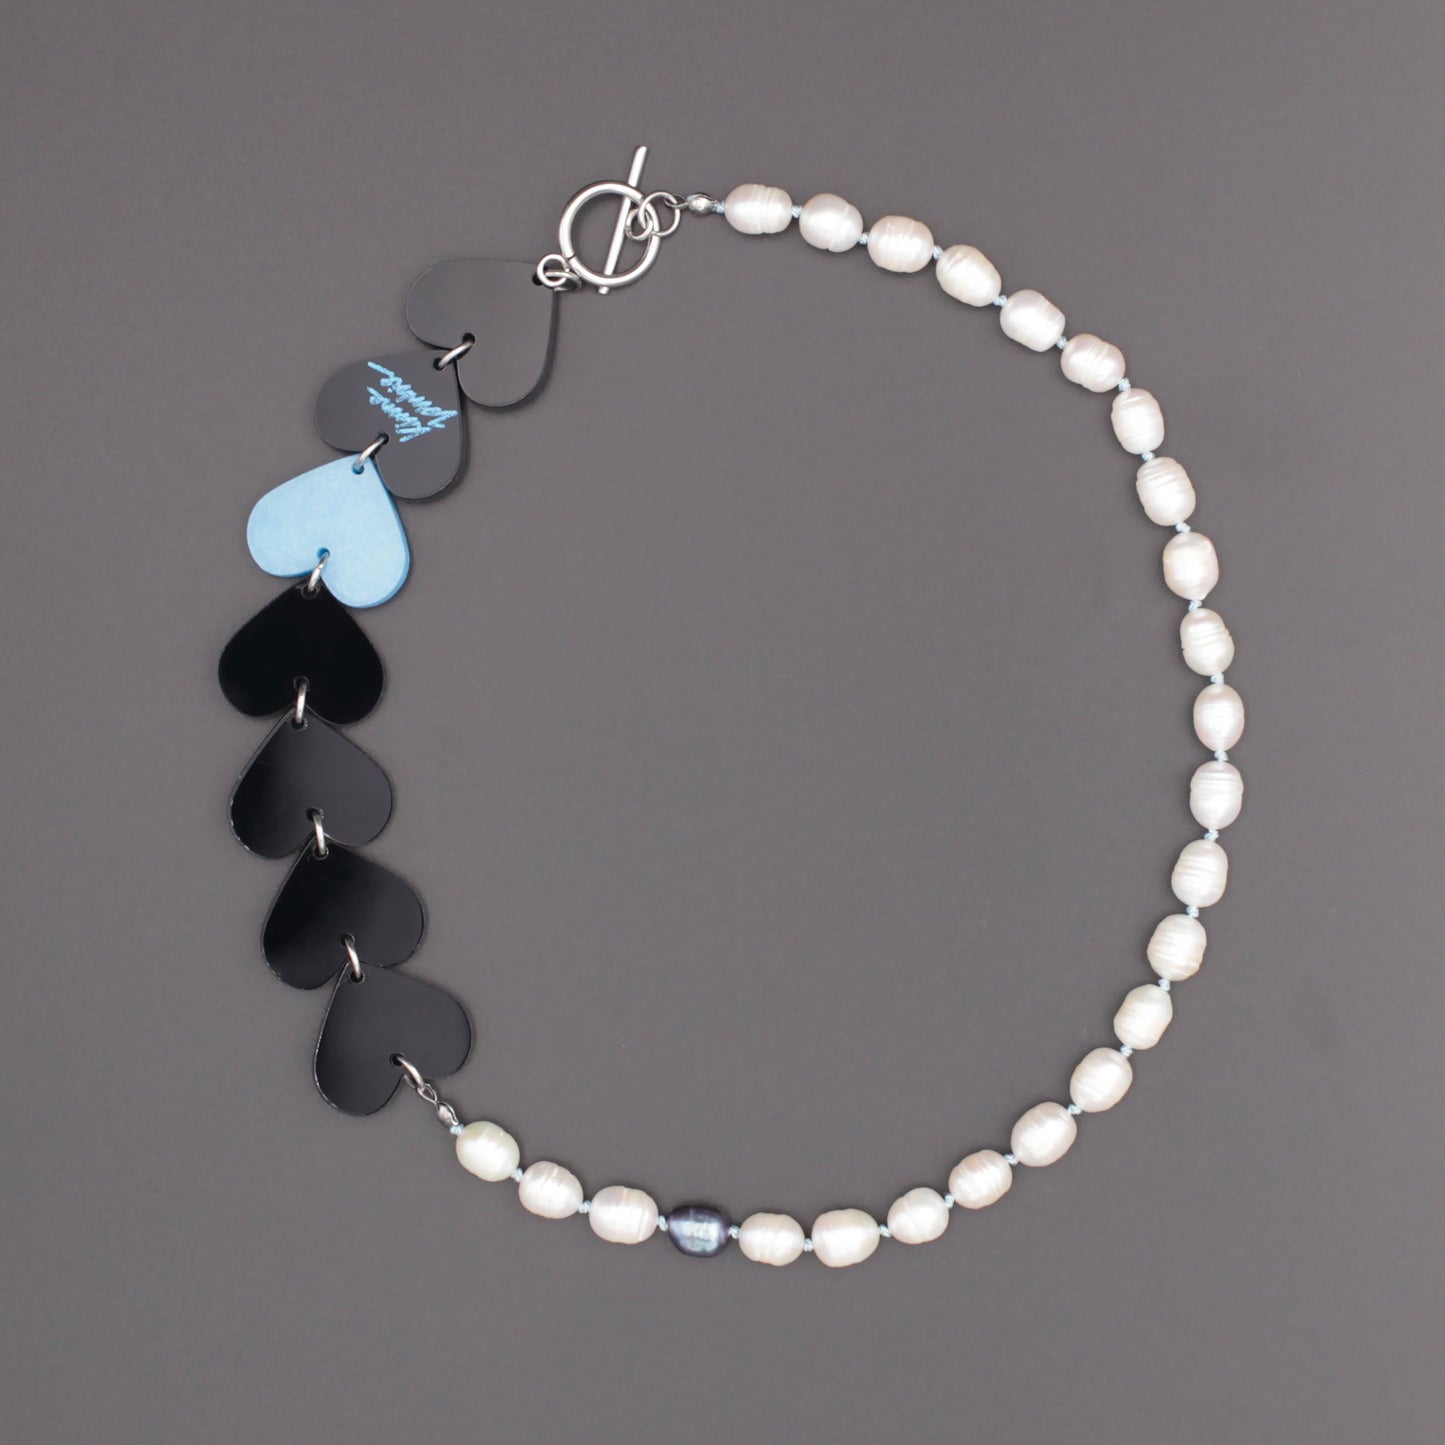 Laser-cut and resin black and blue hearts necklace with freshwater pearls and toggle clasp on a black background. 